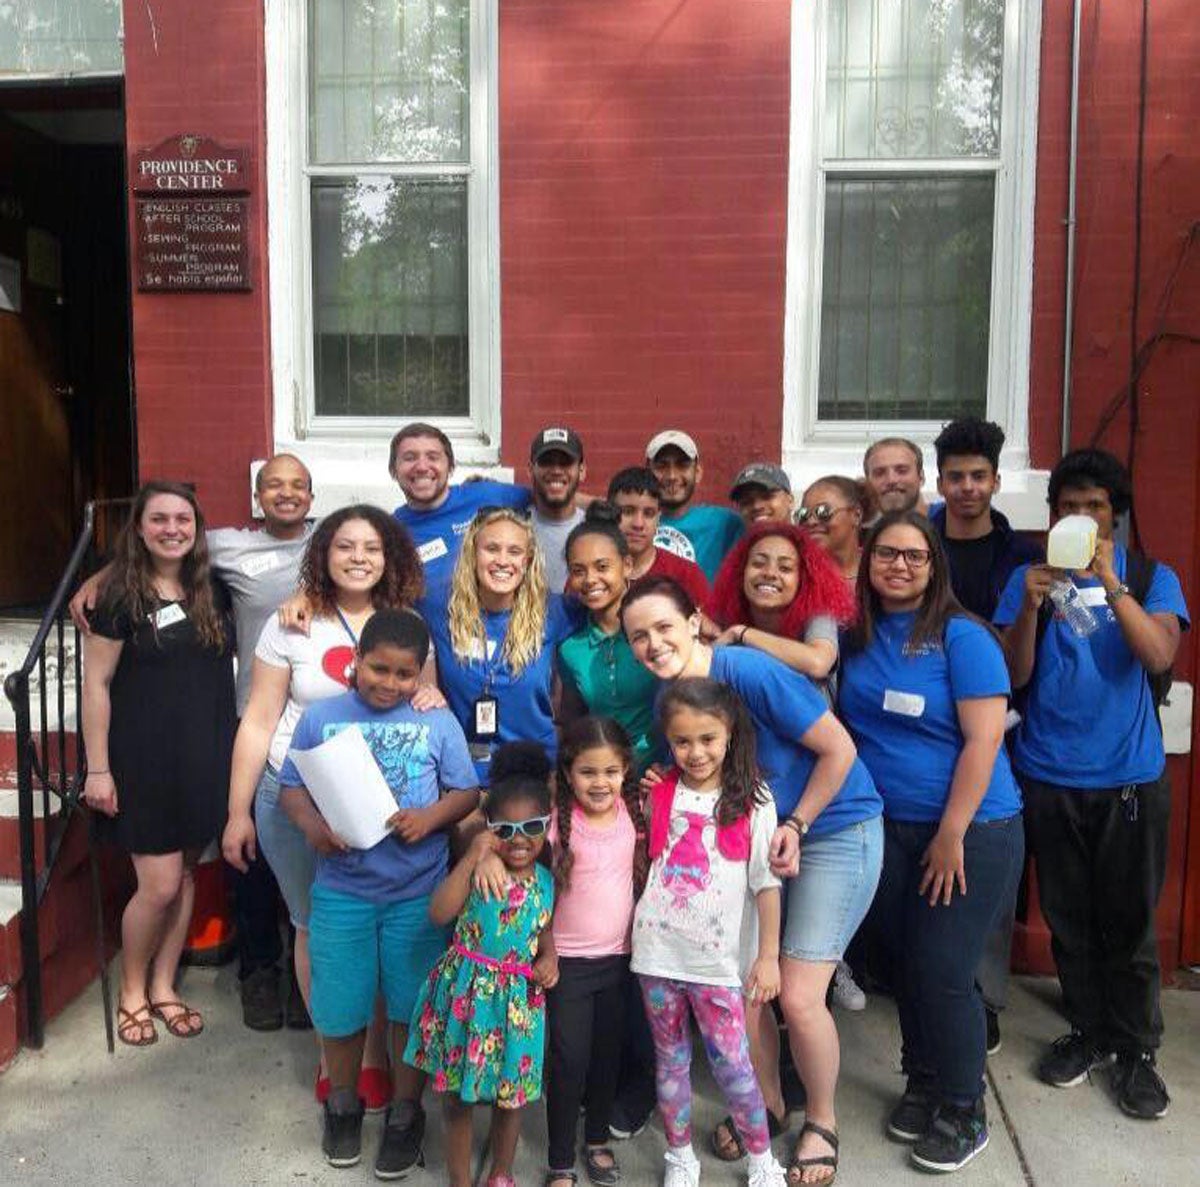 Savannah (middle row, 2nd to the left) poses with the staff of The Providence Center outside their North Philly headquarters. (Photo courtesy of The Providence Center)